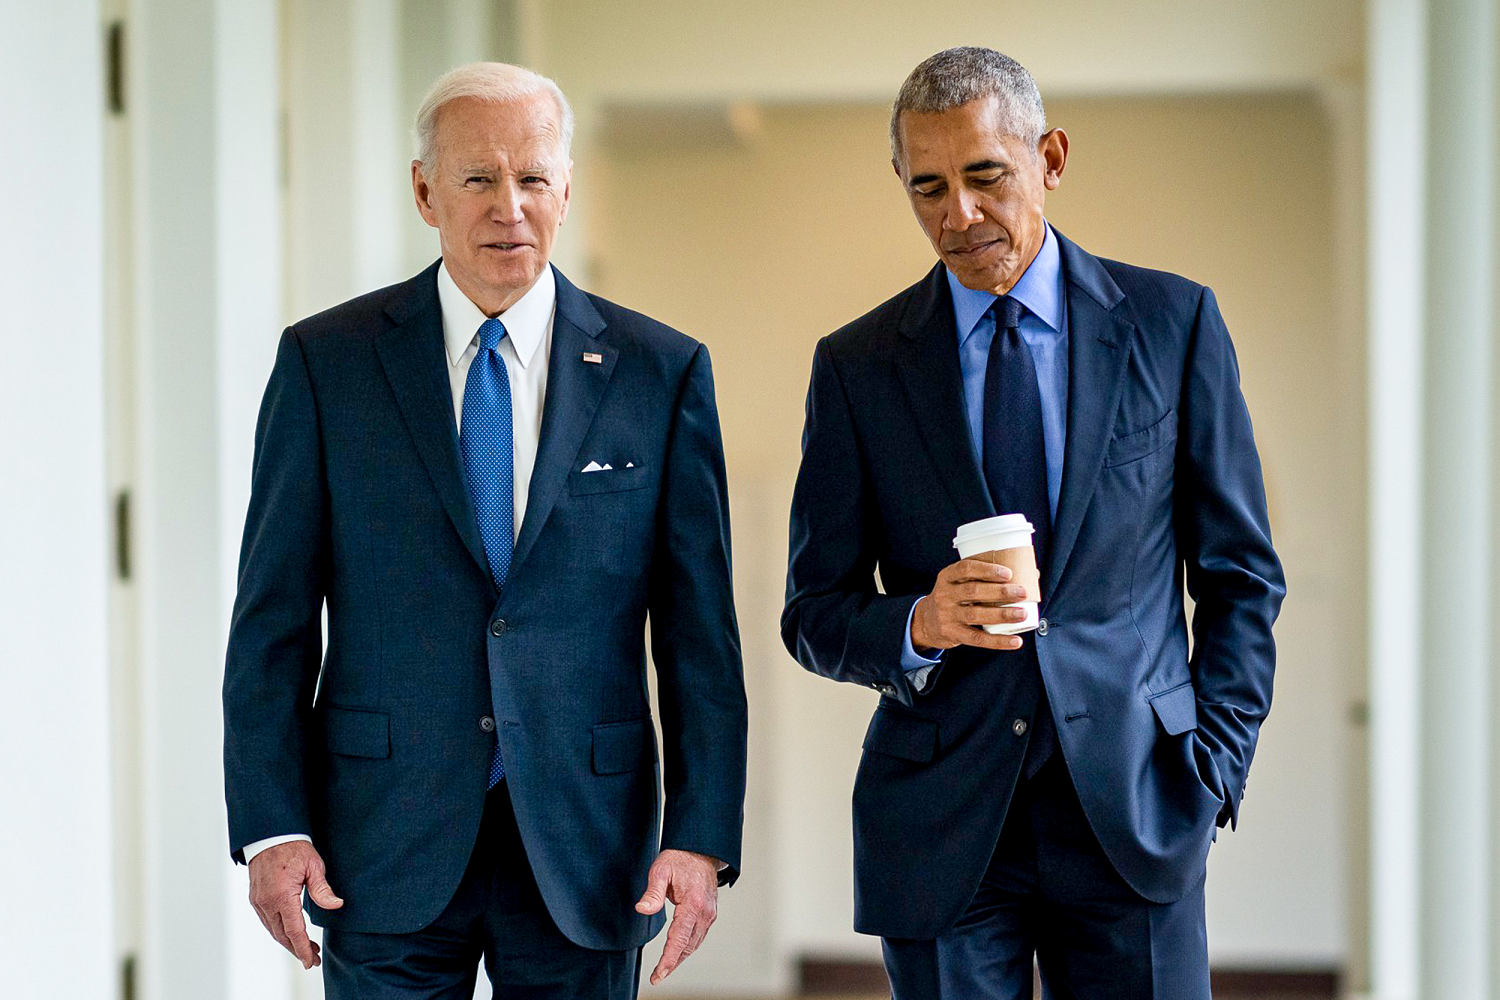 Obama has 'concerns' about Biden's candidacy, but feels personally protective, sources say